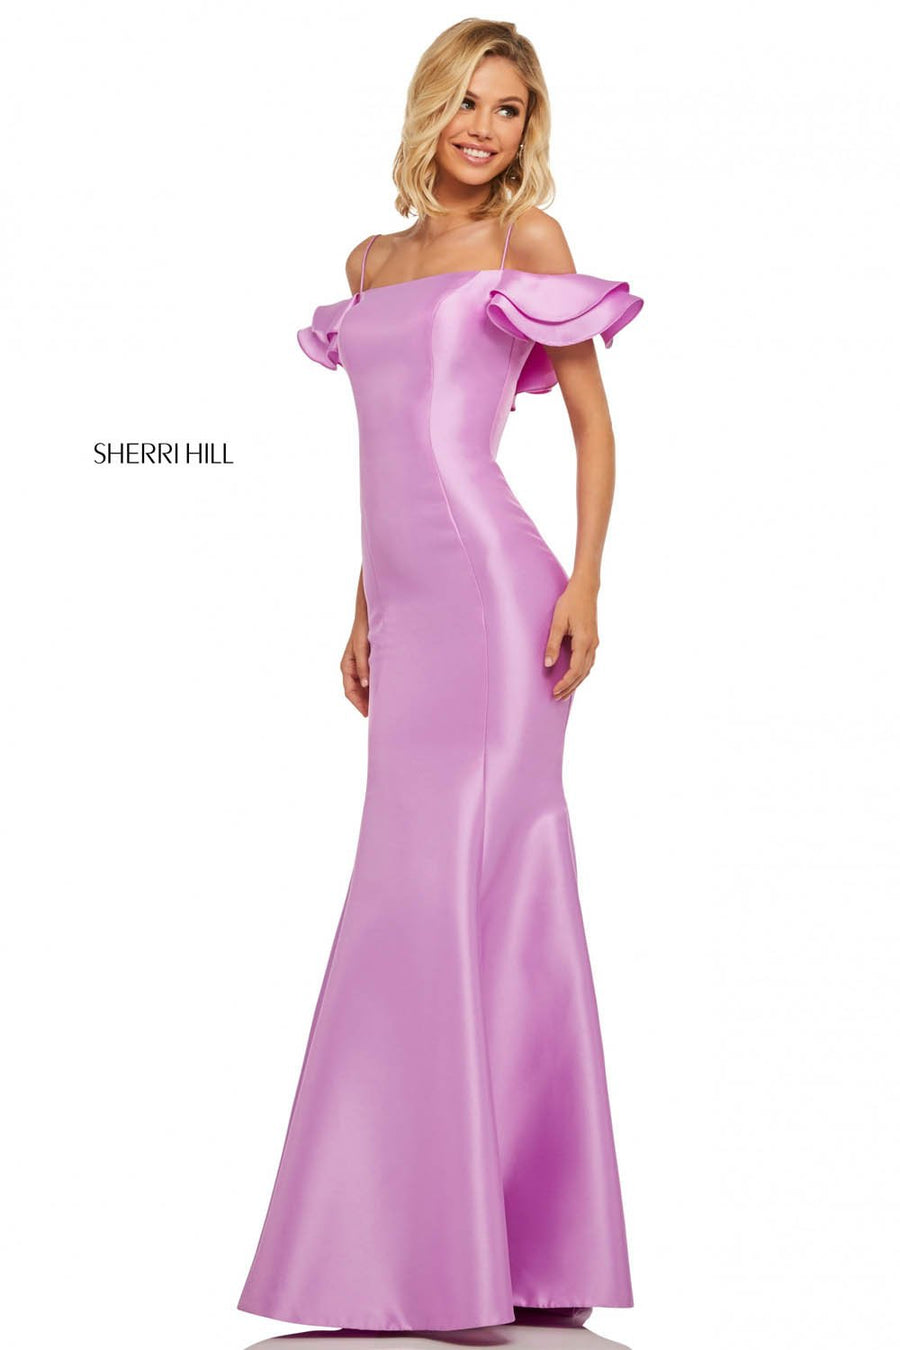 Sherri Hill 52467 prom dress images.  Sherri Hill 52467 is available in these colors: Lilac, Light Blue, Yellow, Fuchsia, Black, Navy, Red.